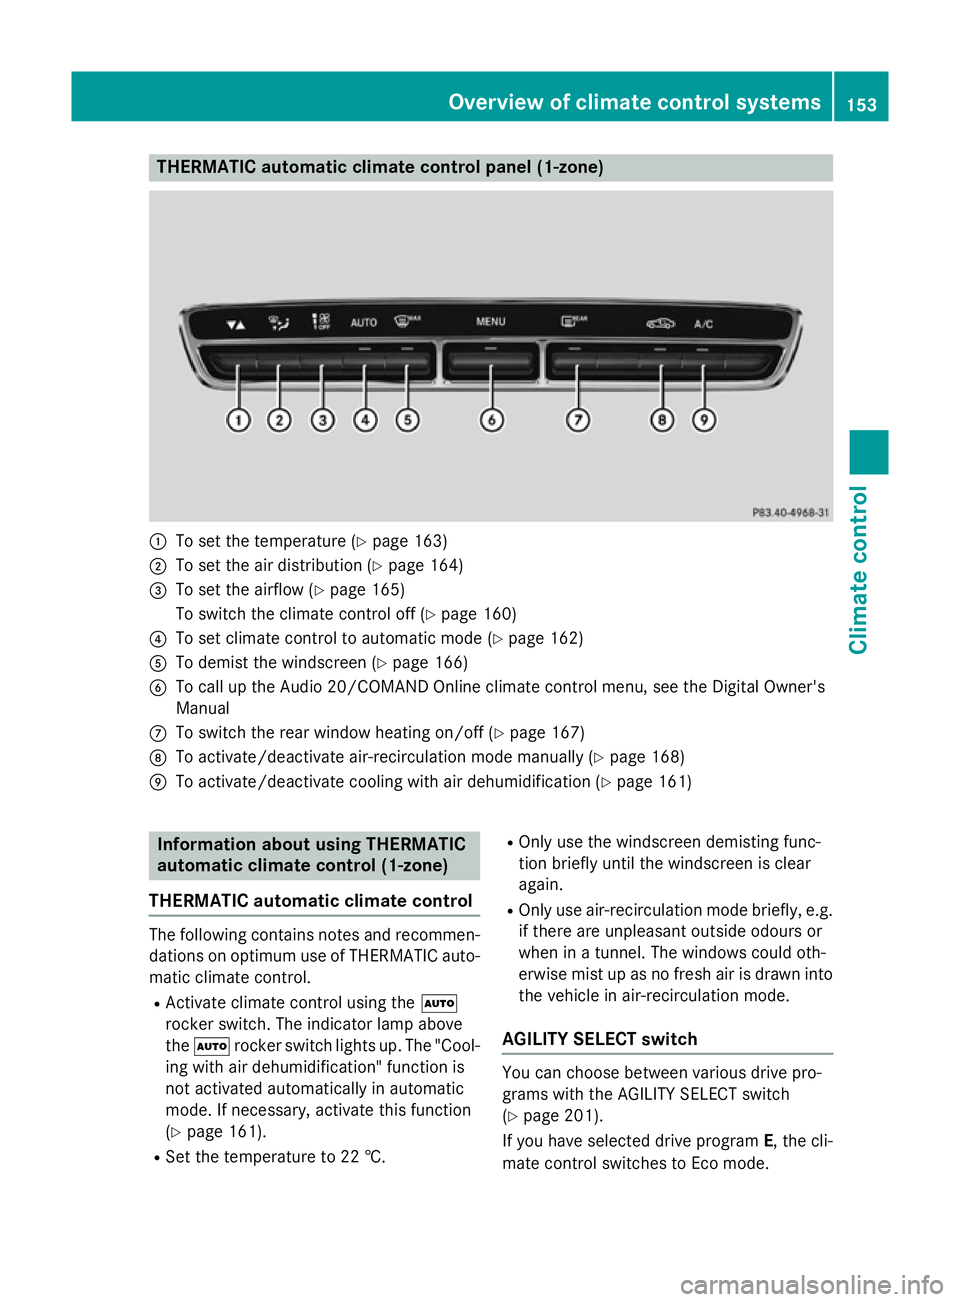 MERCEDES-BENZ C-CLASS ESTATE 2014  Owners Manual THERMATIC automatic climate control panel (1-zone)
:
To set the temperature (Y page 163)
; To set the air distribution (Y page 164)
= To set the airflow (Y page 165)
To switch the climate control off 